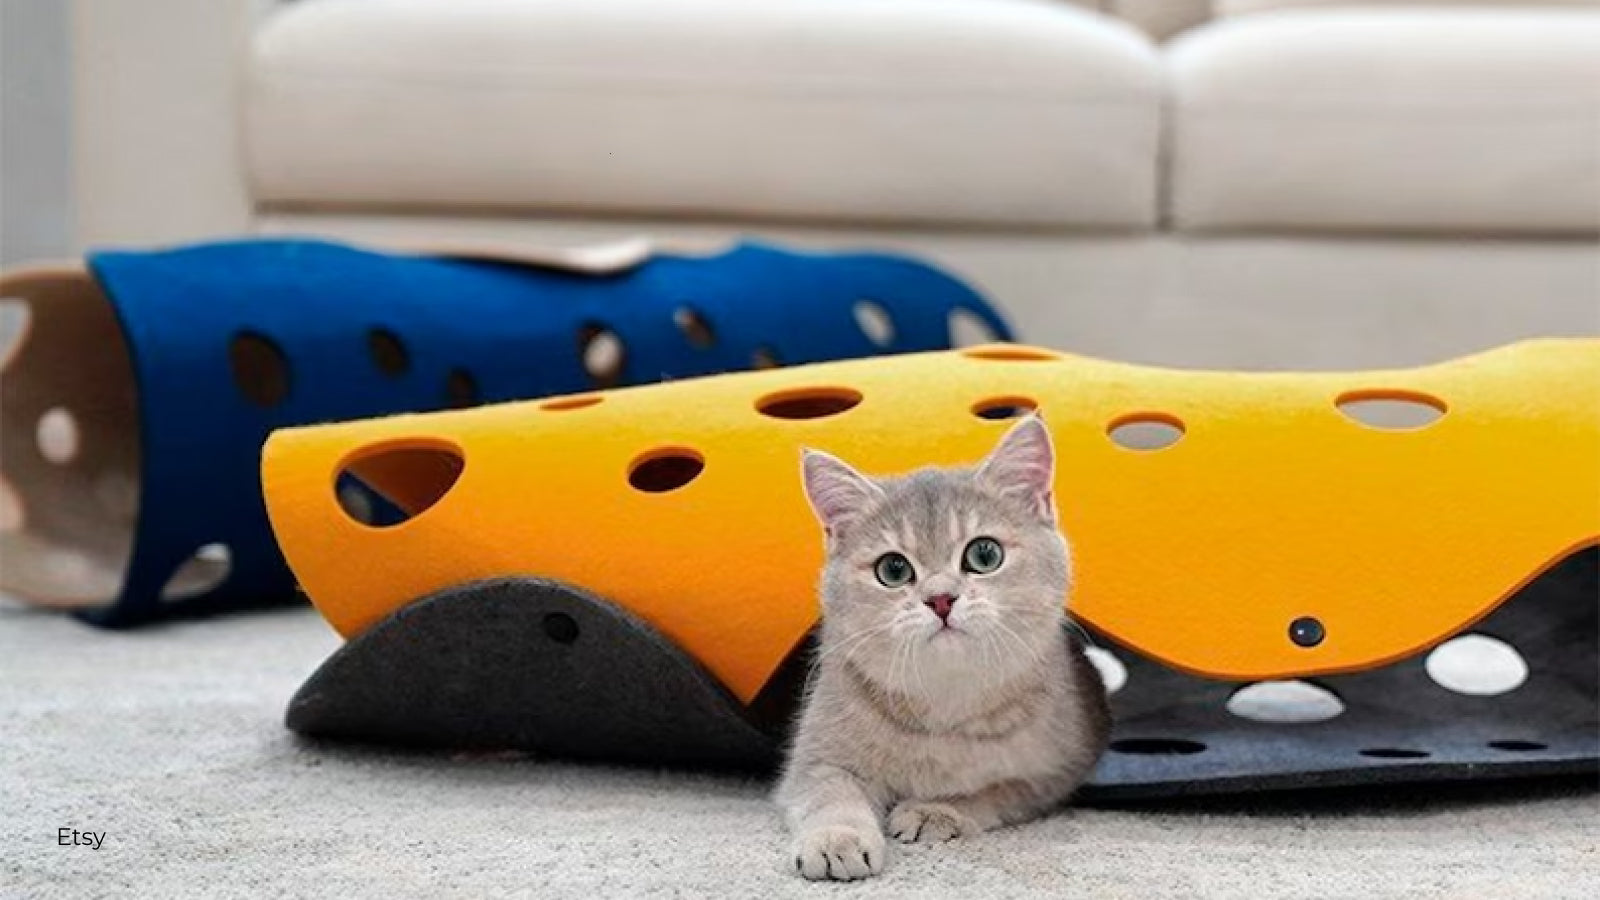 A gray cat plays with blue and yellow felted play tunnels